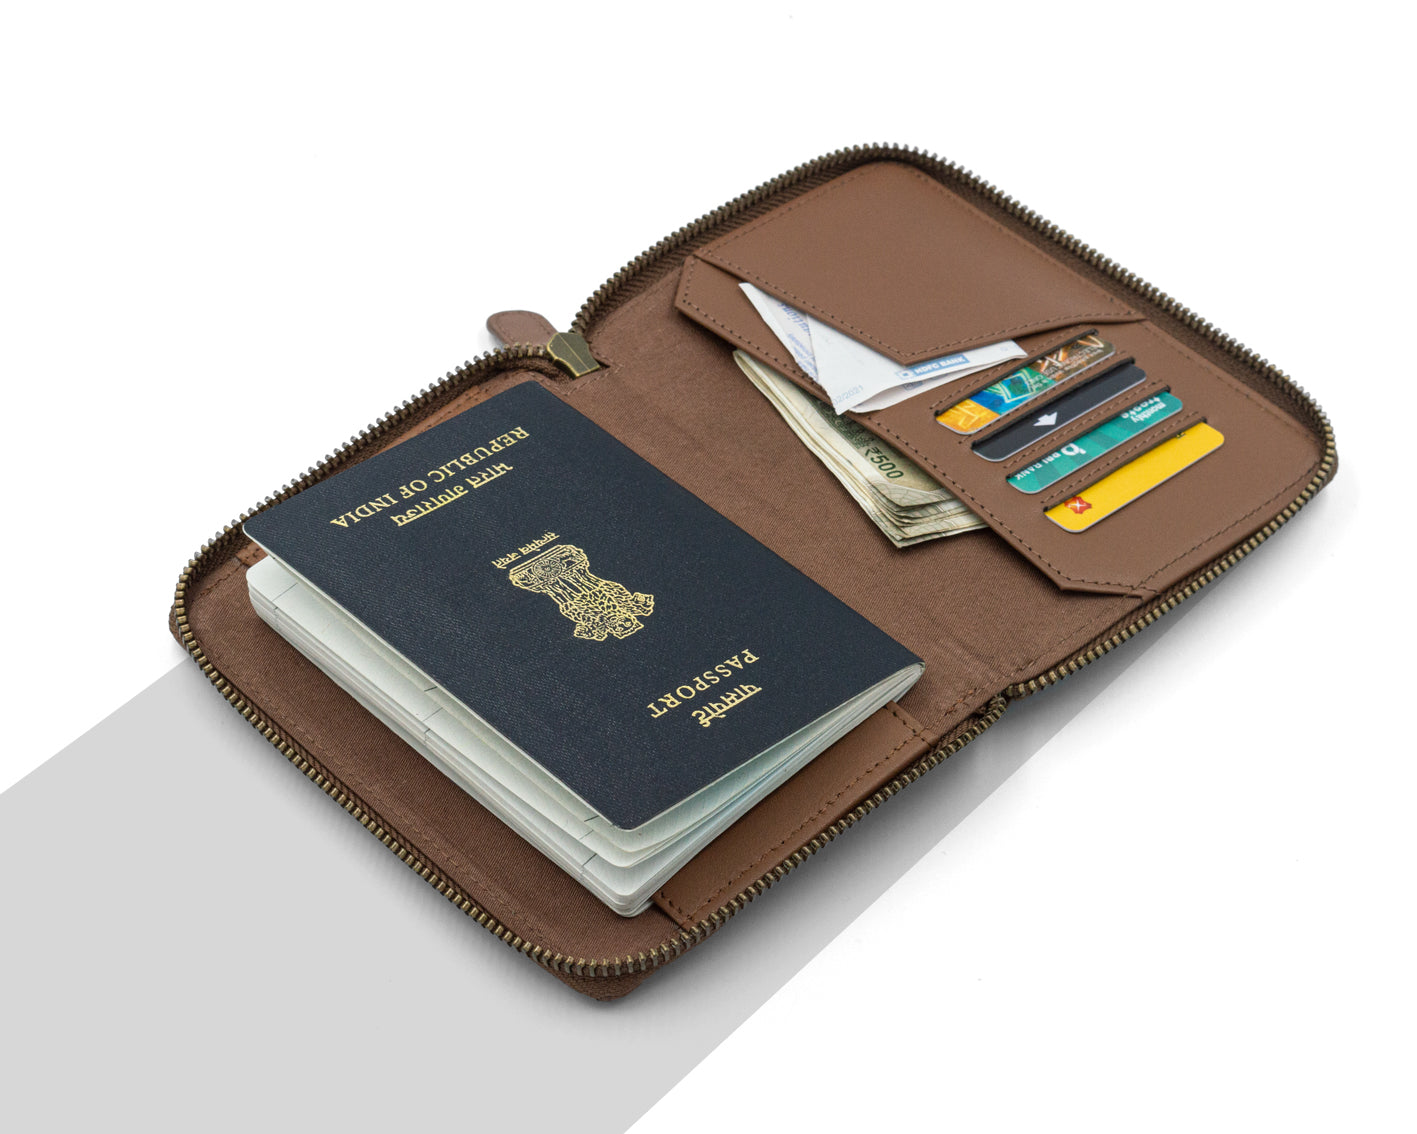 Troika RFID Passport Cover and Travel Wallet | Troikaus.com